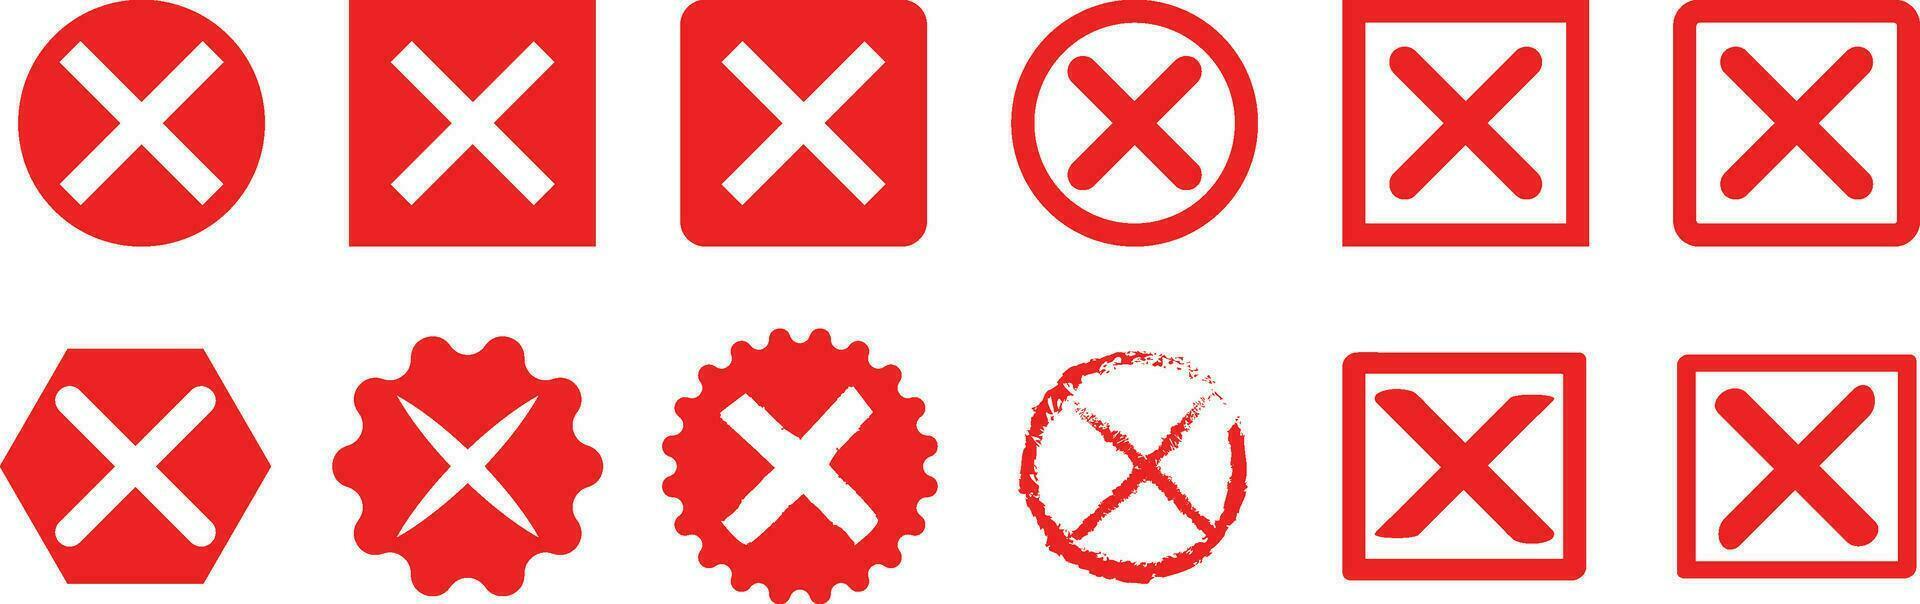 Red cross icon set. Circle and square flat buttons. Vector illustration